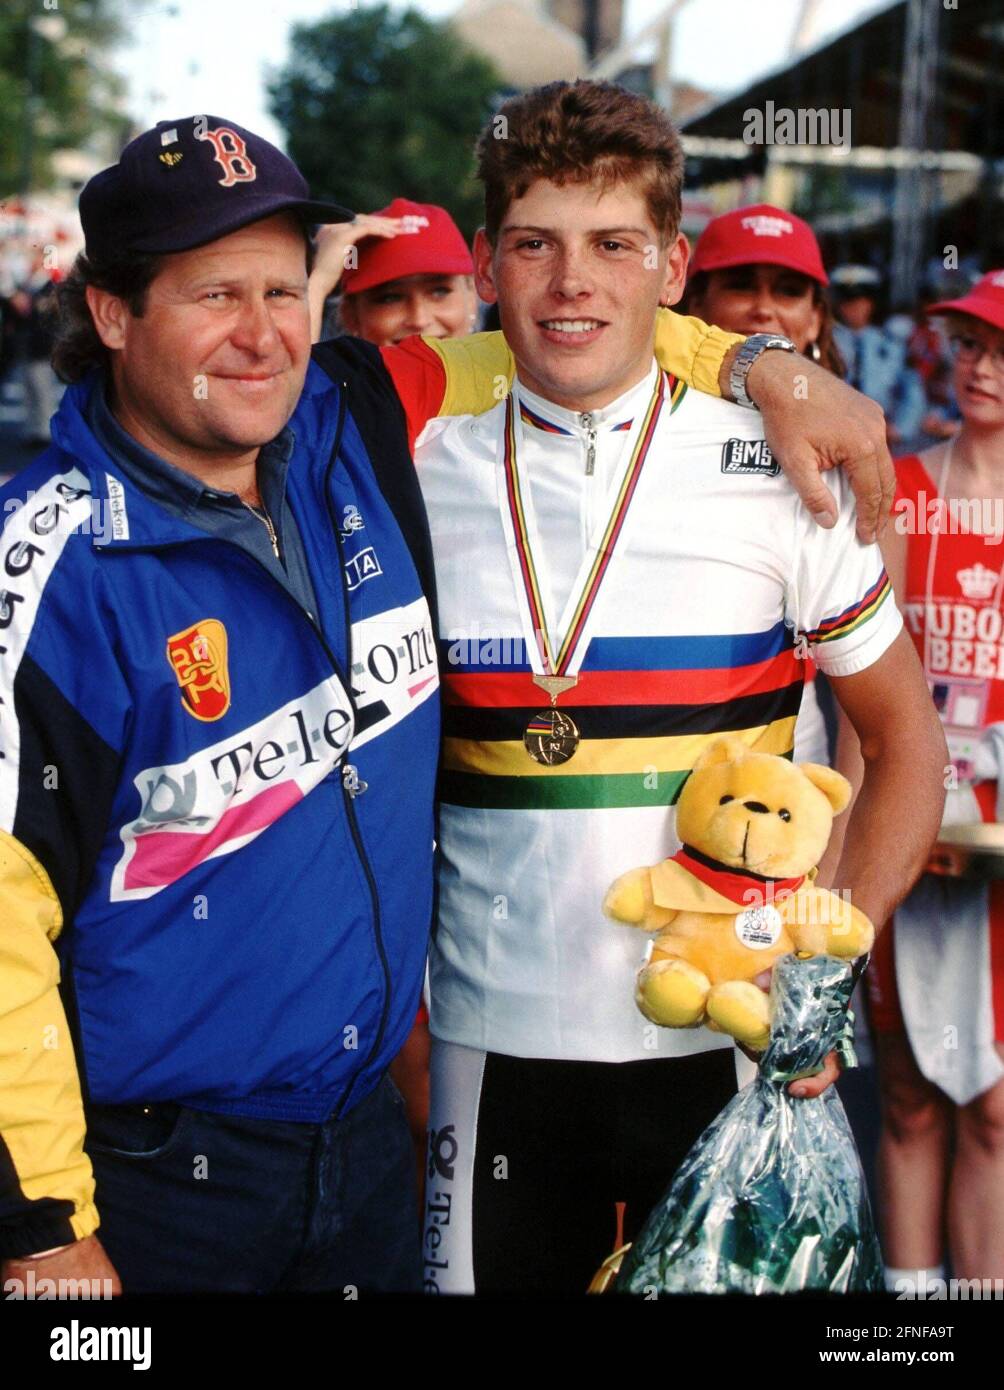 Cycling world championship 1993 in Oslo - world champion of the road amateurs Jan Ullrich with national coach [automated translation] Stock Photo